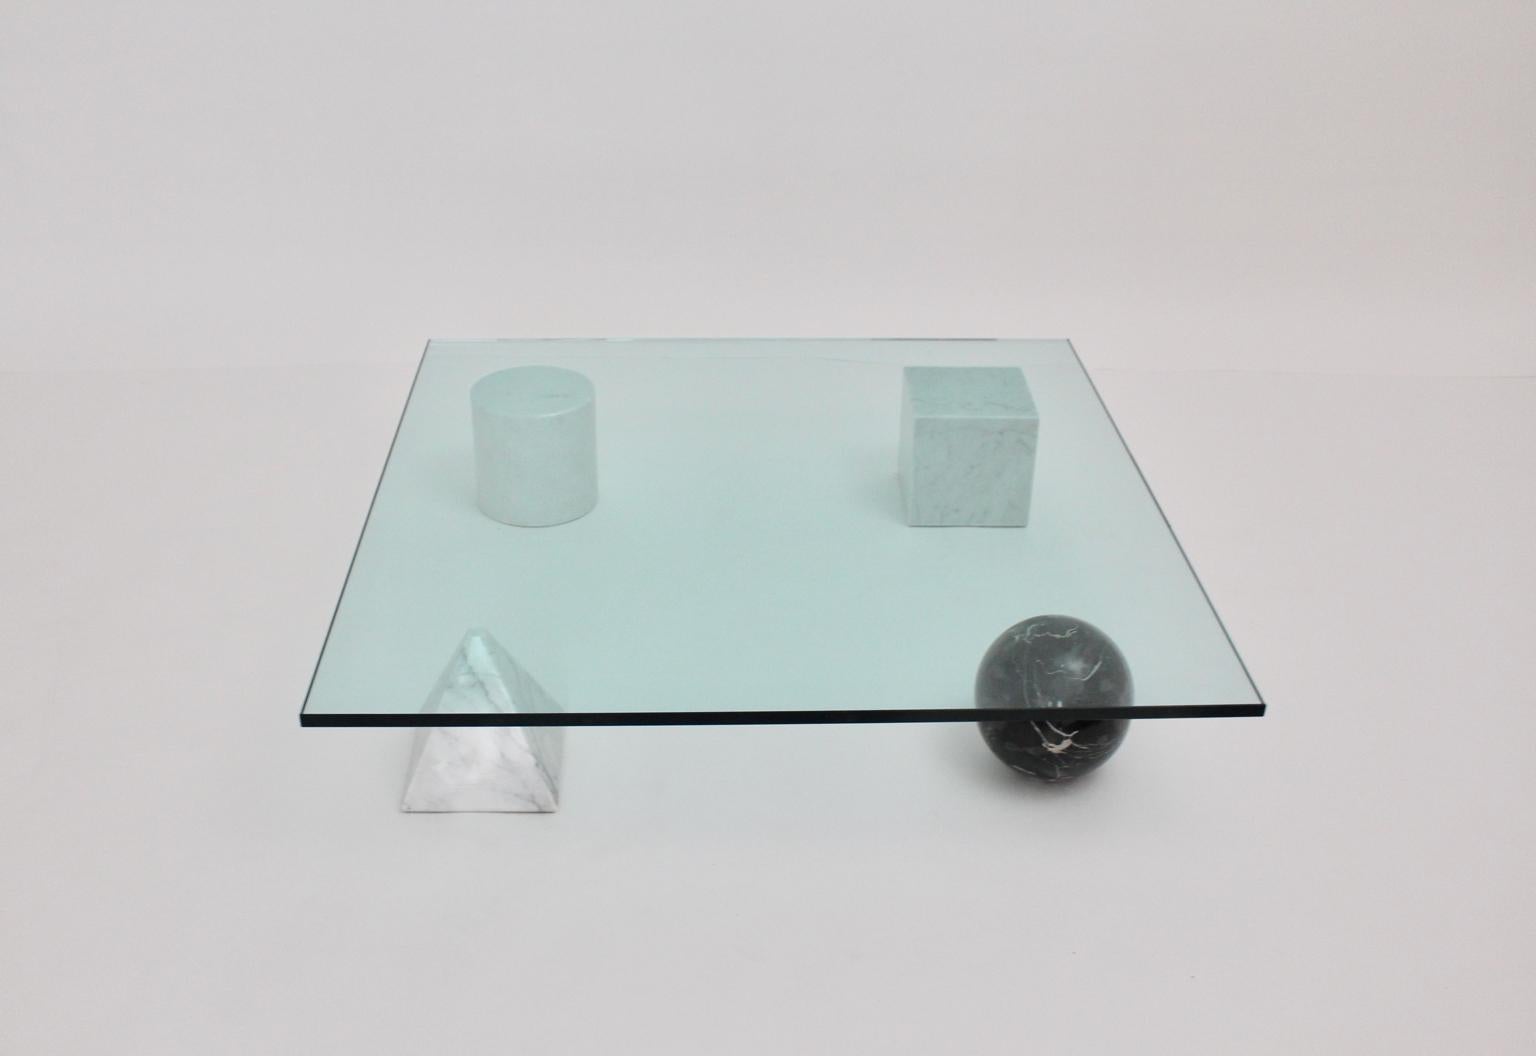 Massimo and Lella Vignelli vintage black and white marble coffee table or sofa table, which was designed 1979 Italy.
The iconic coffee table or sofa table named Metaphora shows a base with four geometric polished marble elements in different marble